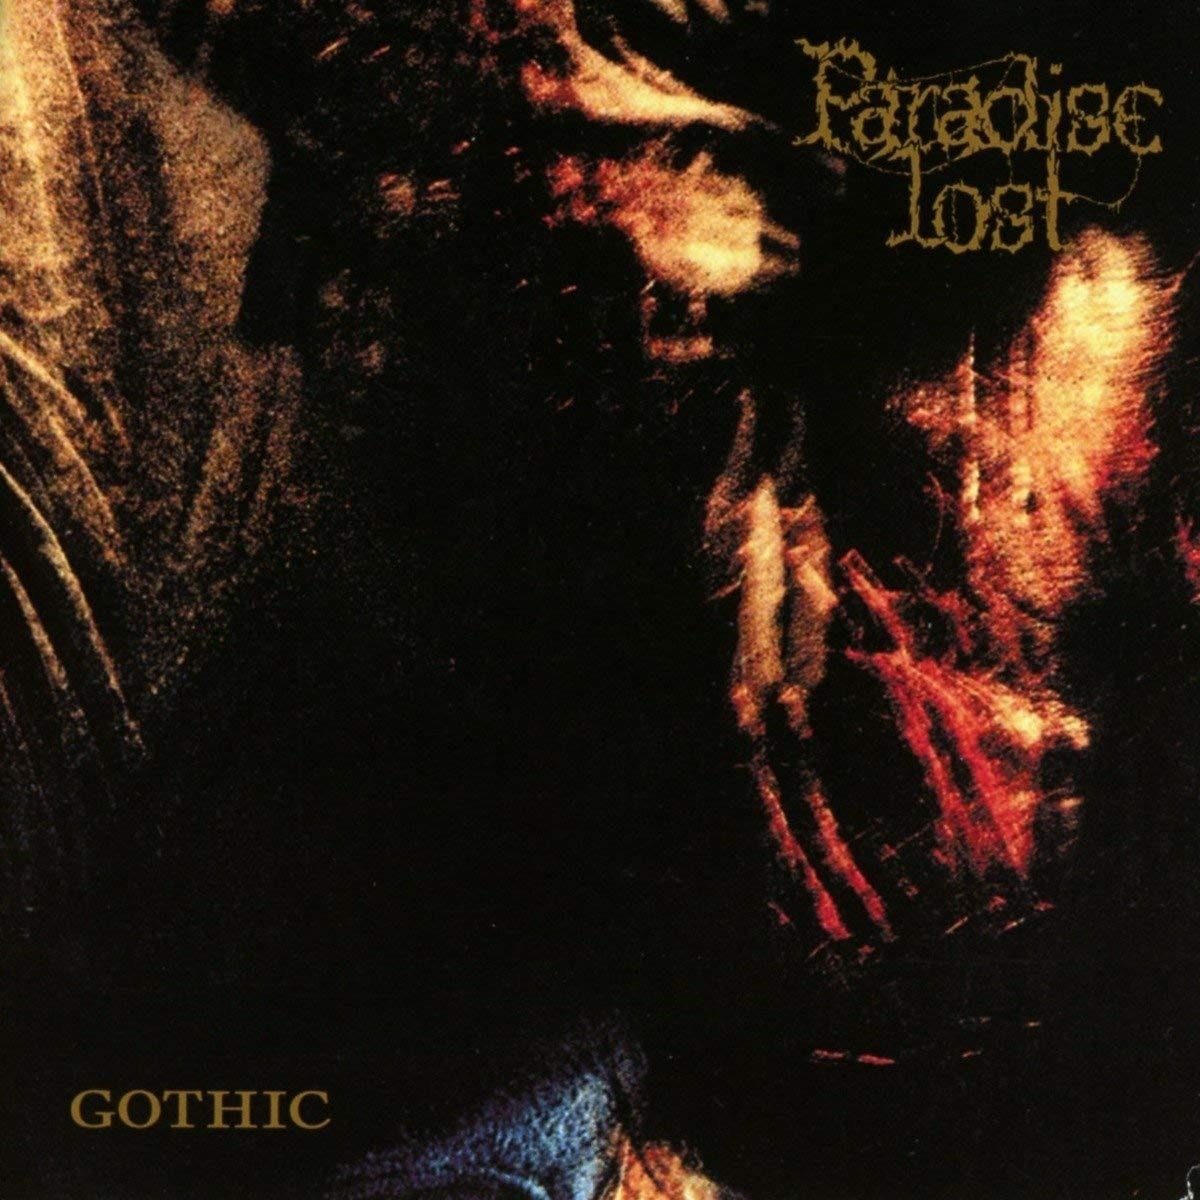 paradise-lost-gothic-bnus-cddvd-dvd-the-lost-tapes-D_NQ_NP_947508-MLB28056516518_082018-F.jpg